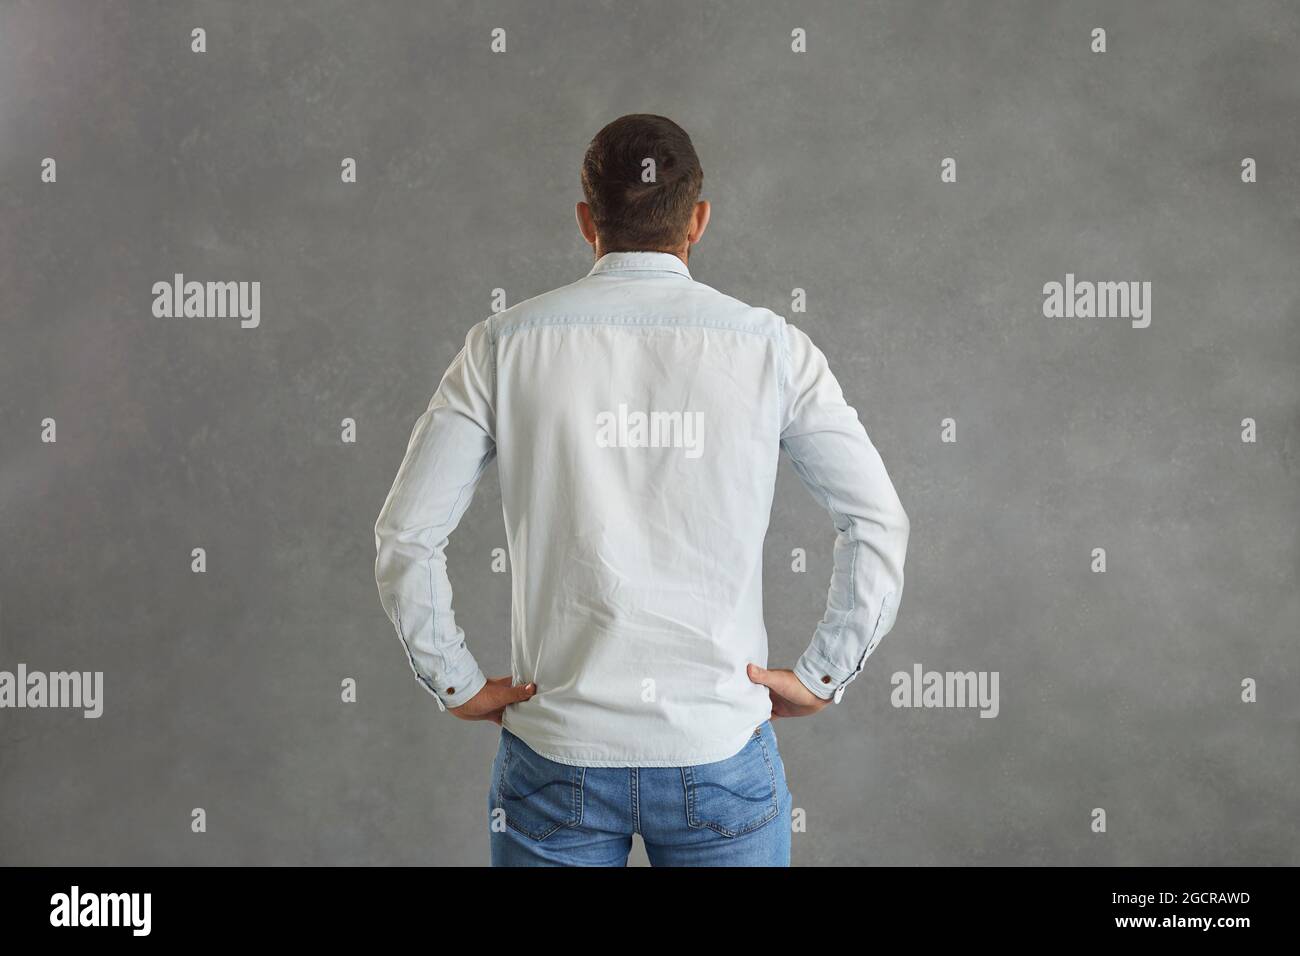 Back view of man in denim shirt standing hands on hips isolated on grey background Stock Photo